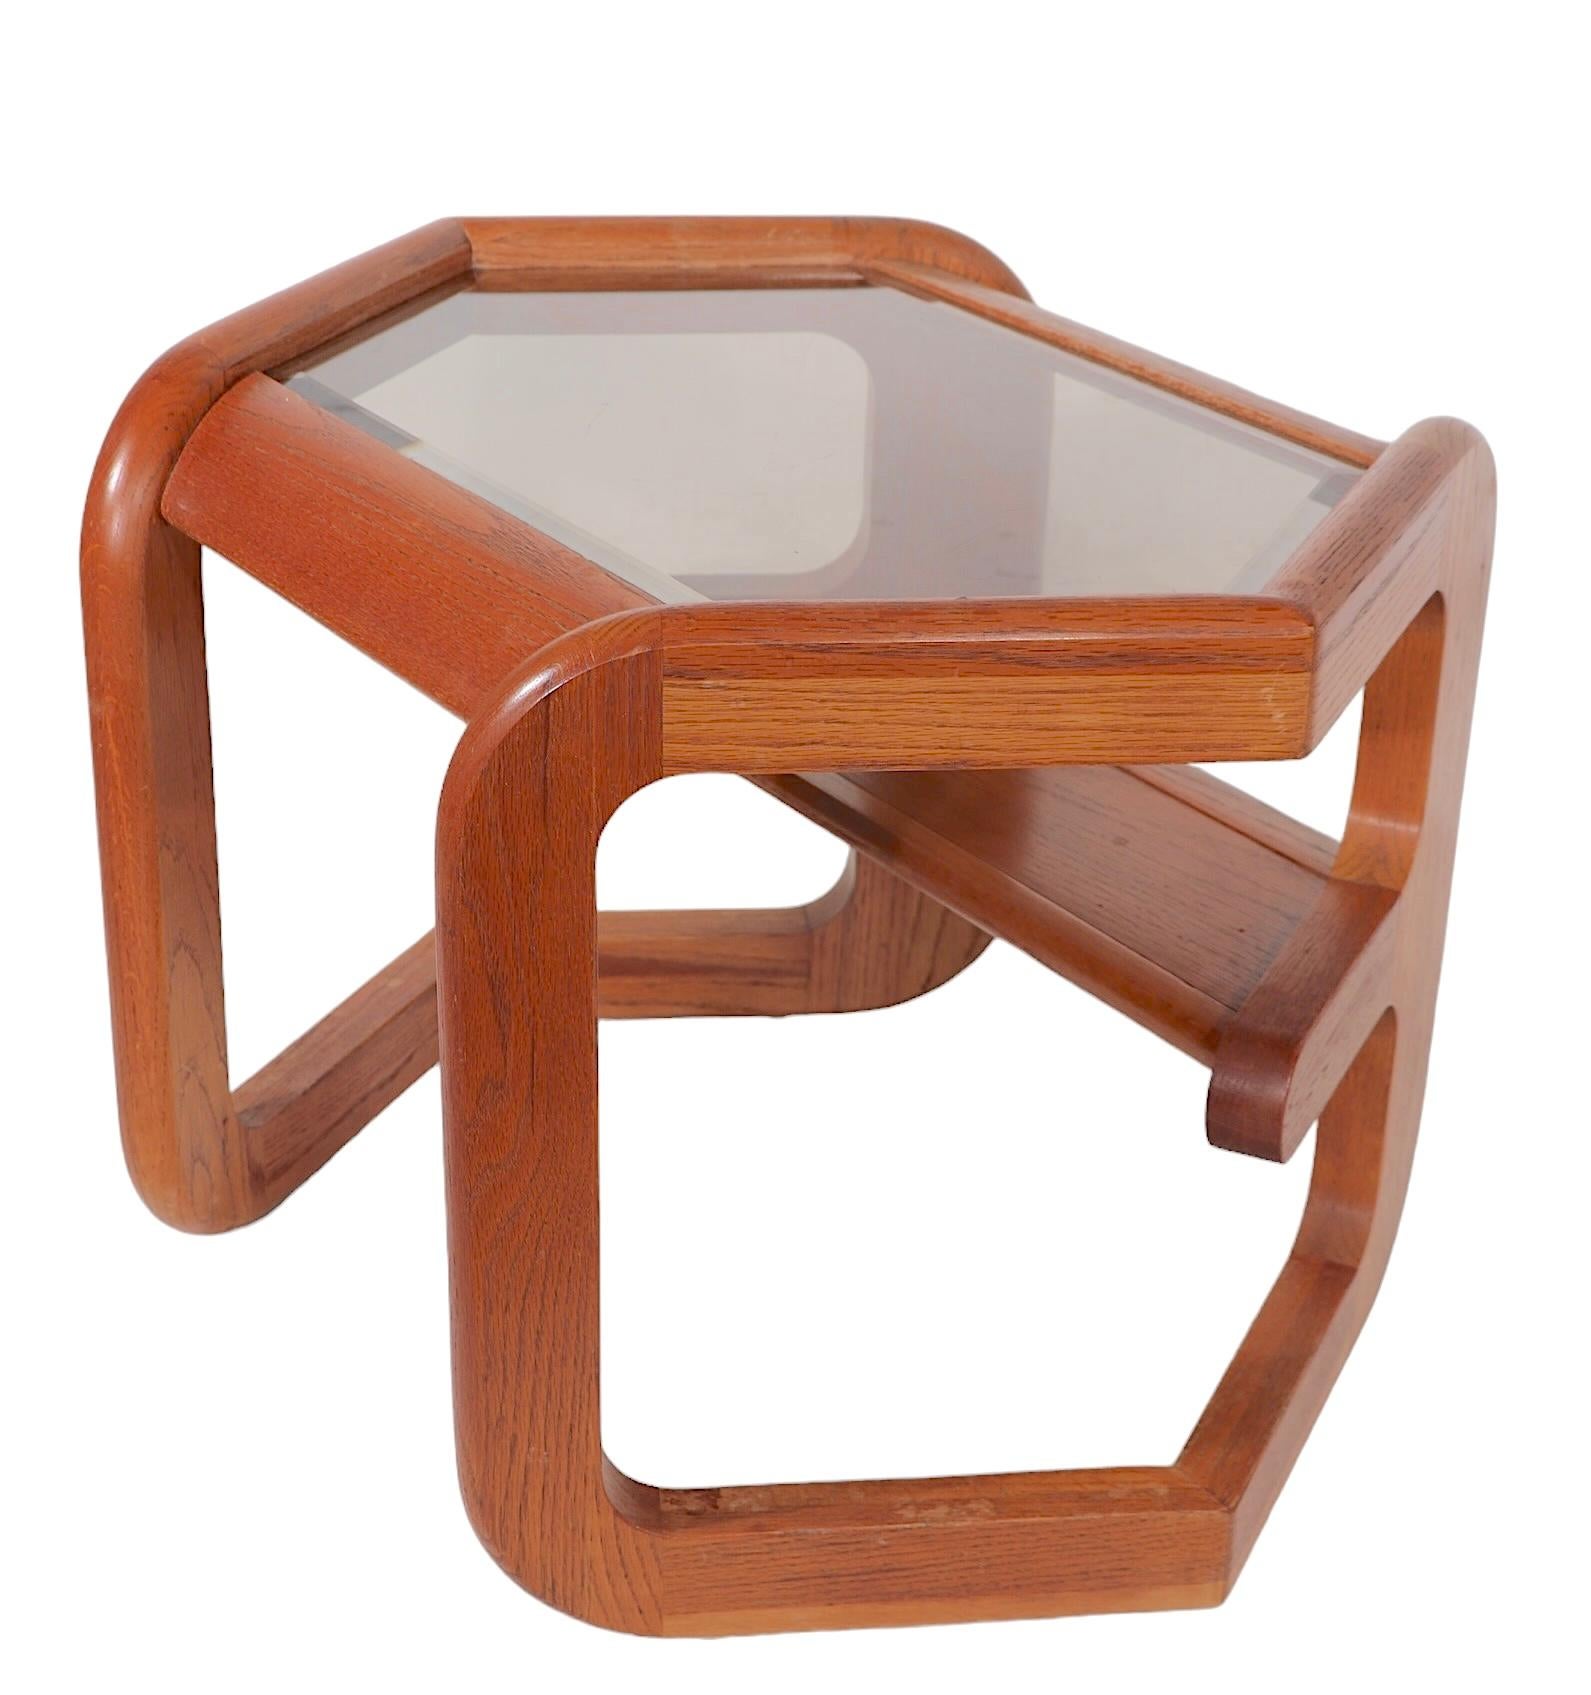 Mersman Side Table designed by Lou Hodges for Mersman c. 1970's For Sale 8